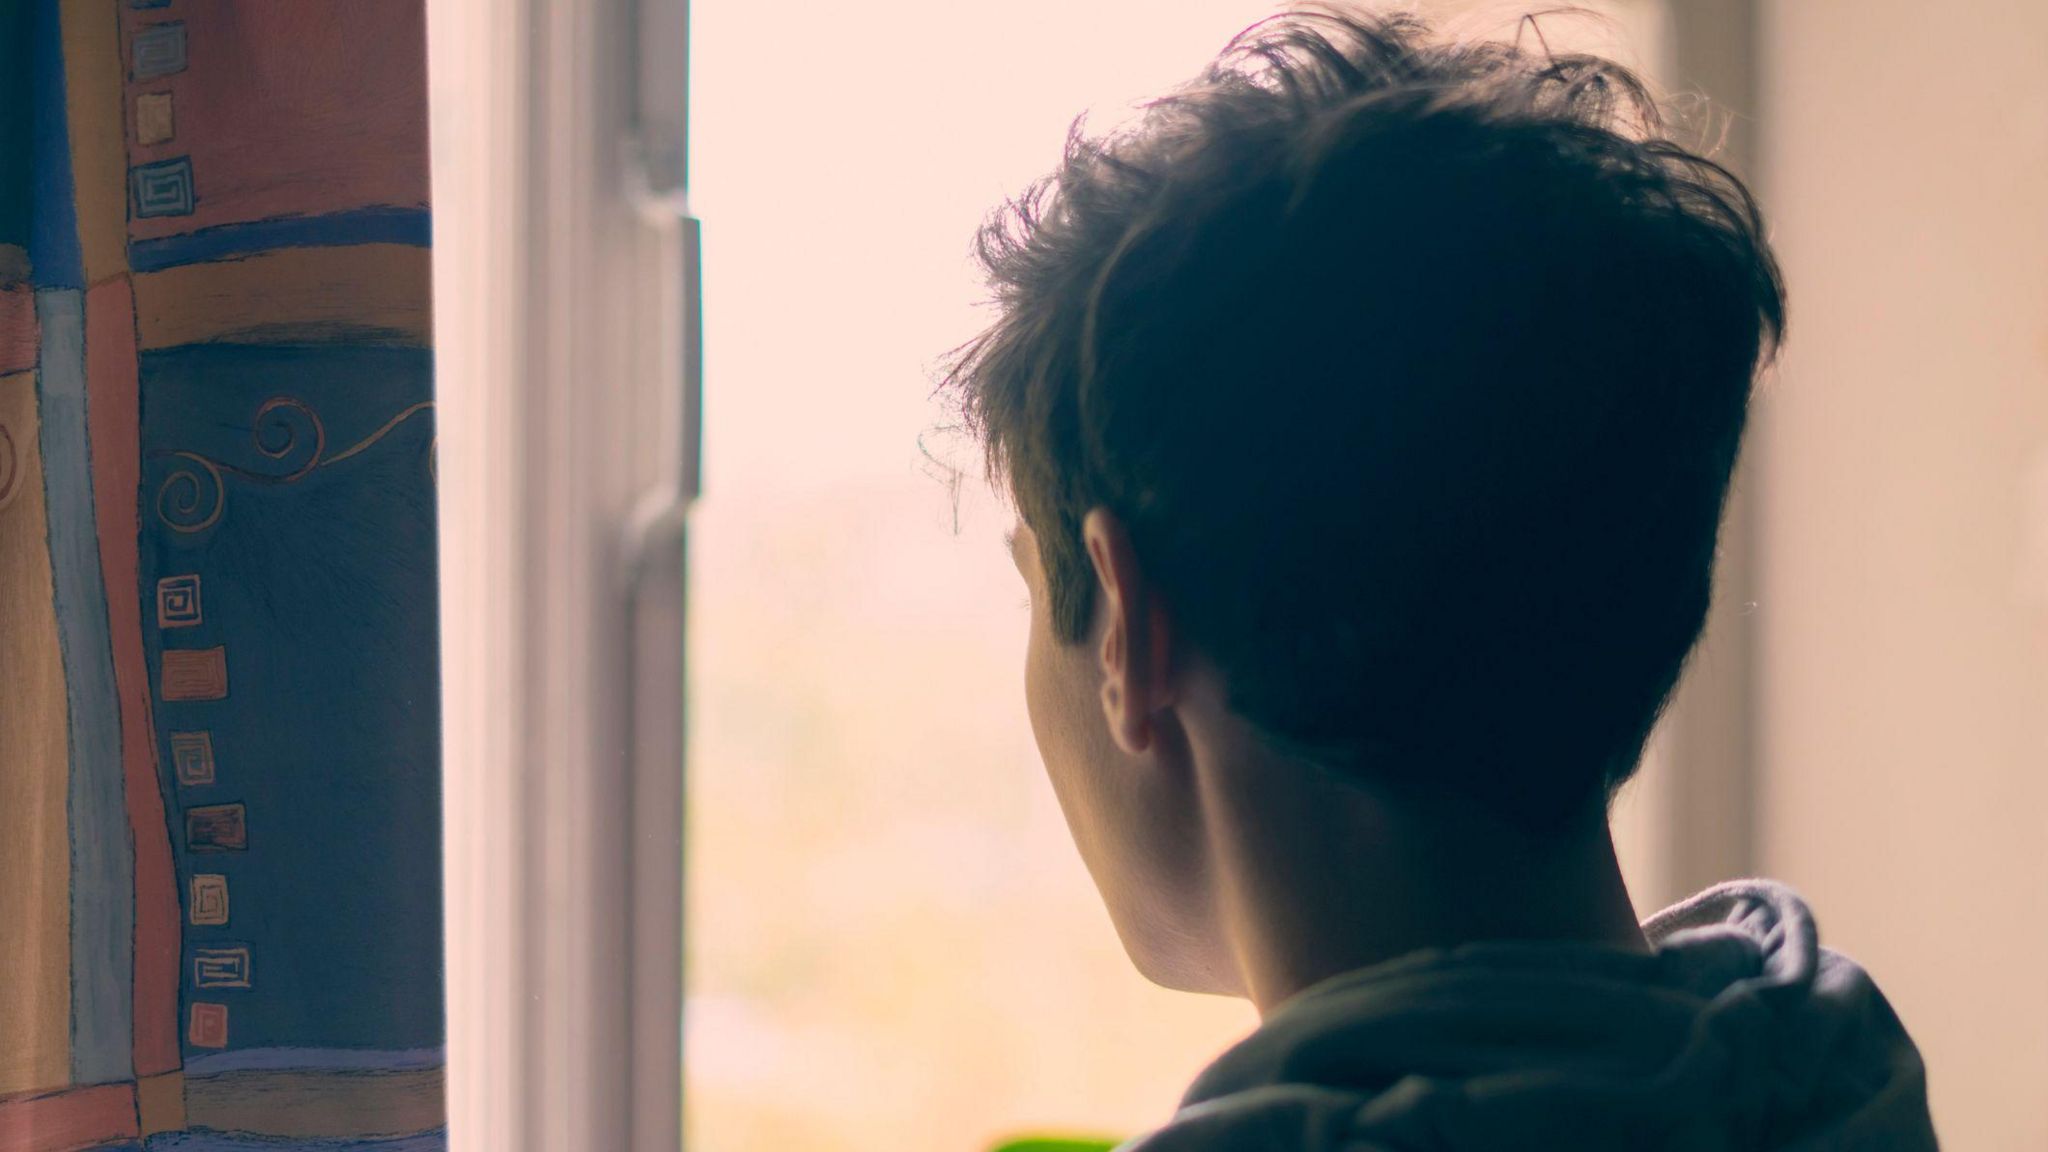 A child seen from the back looks out of a window